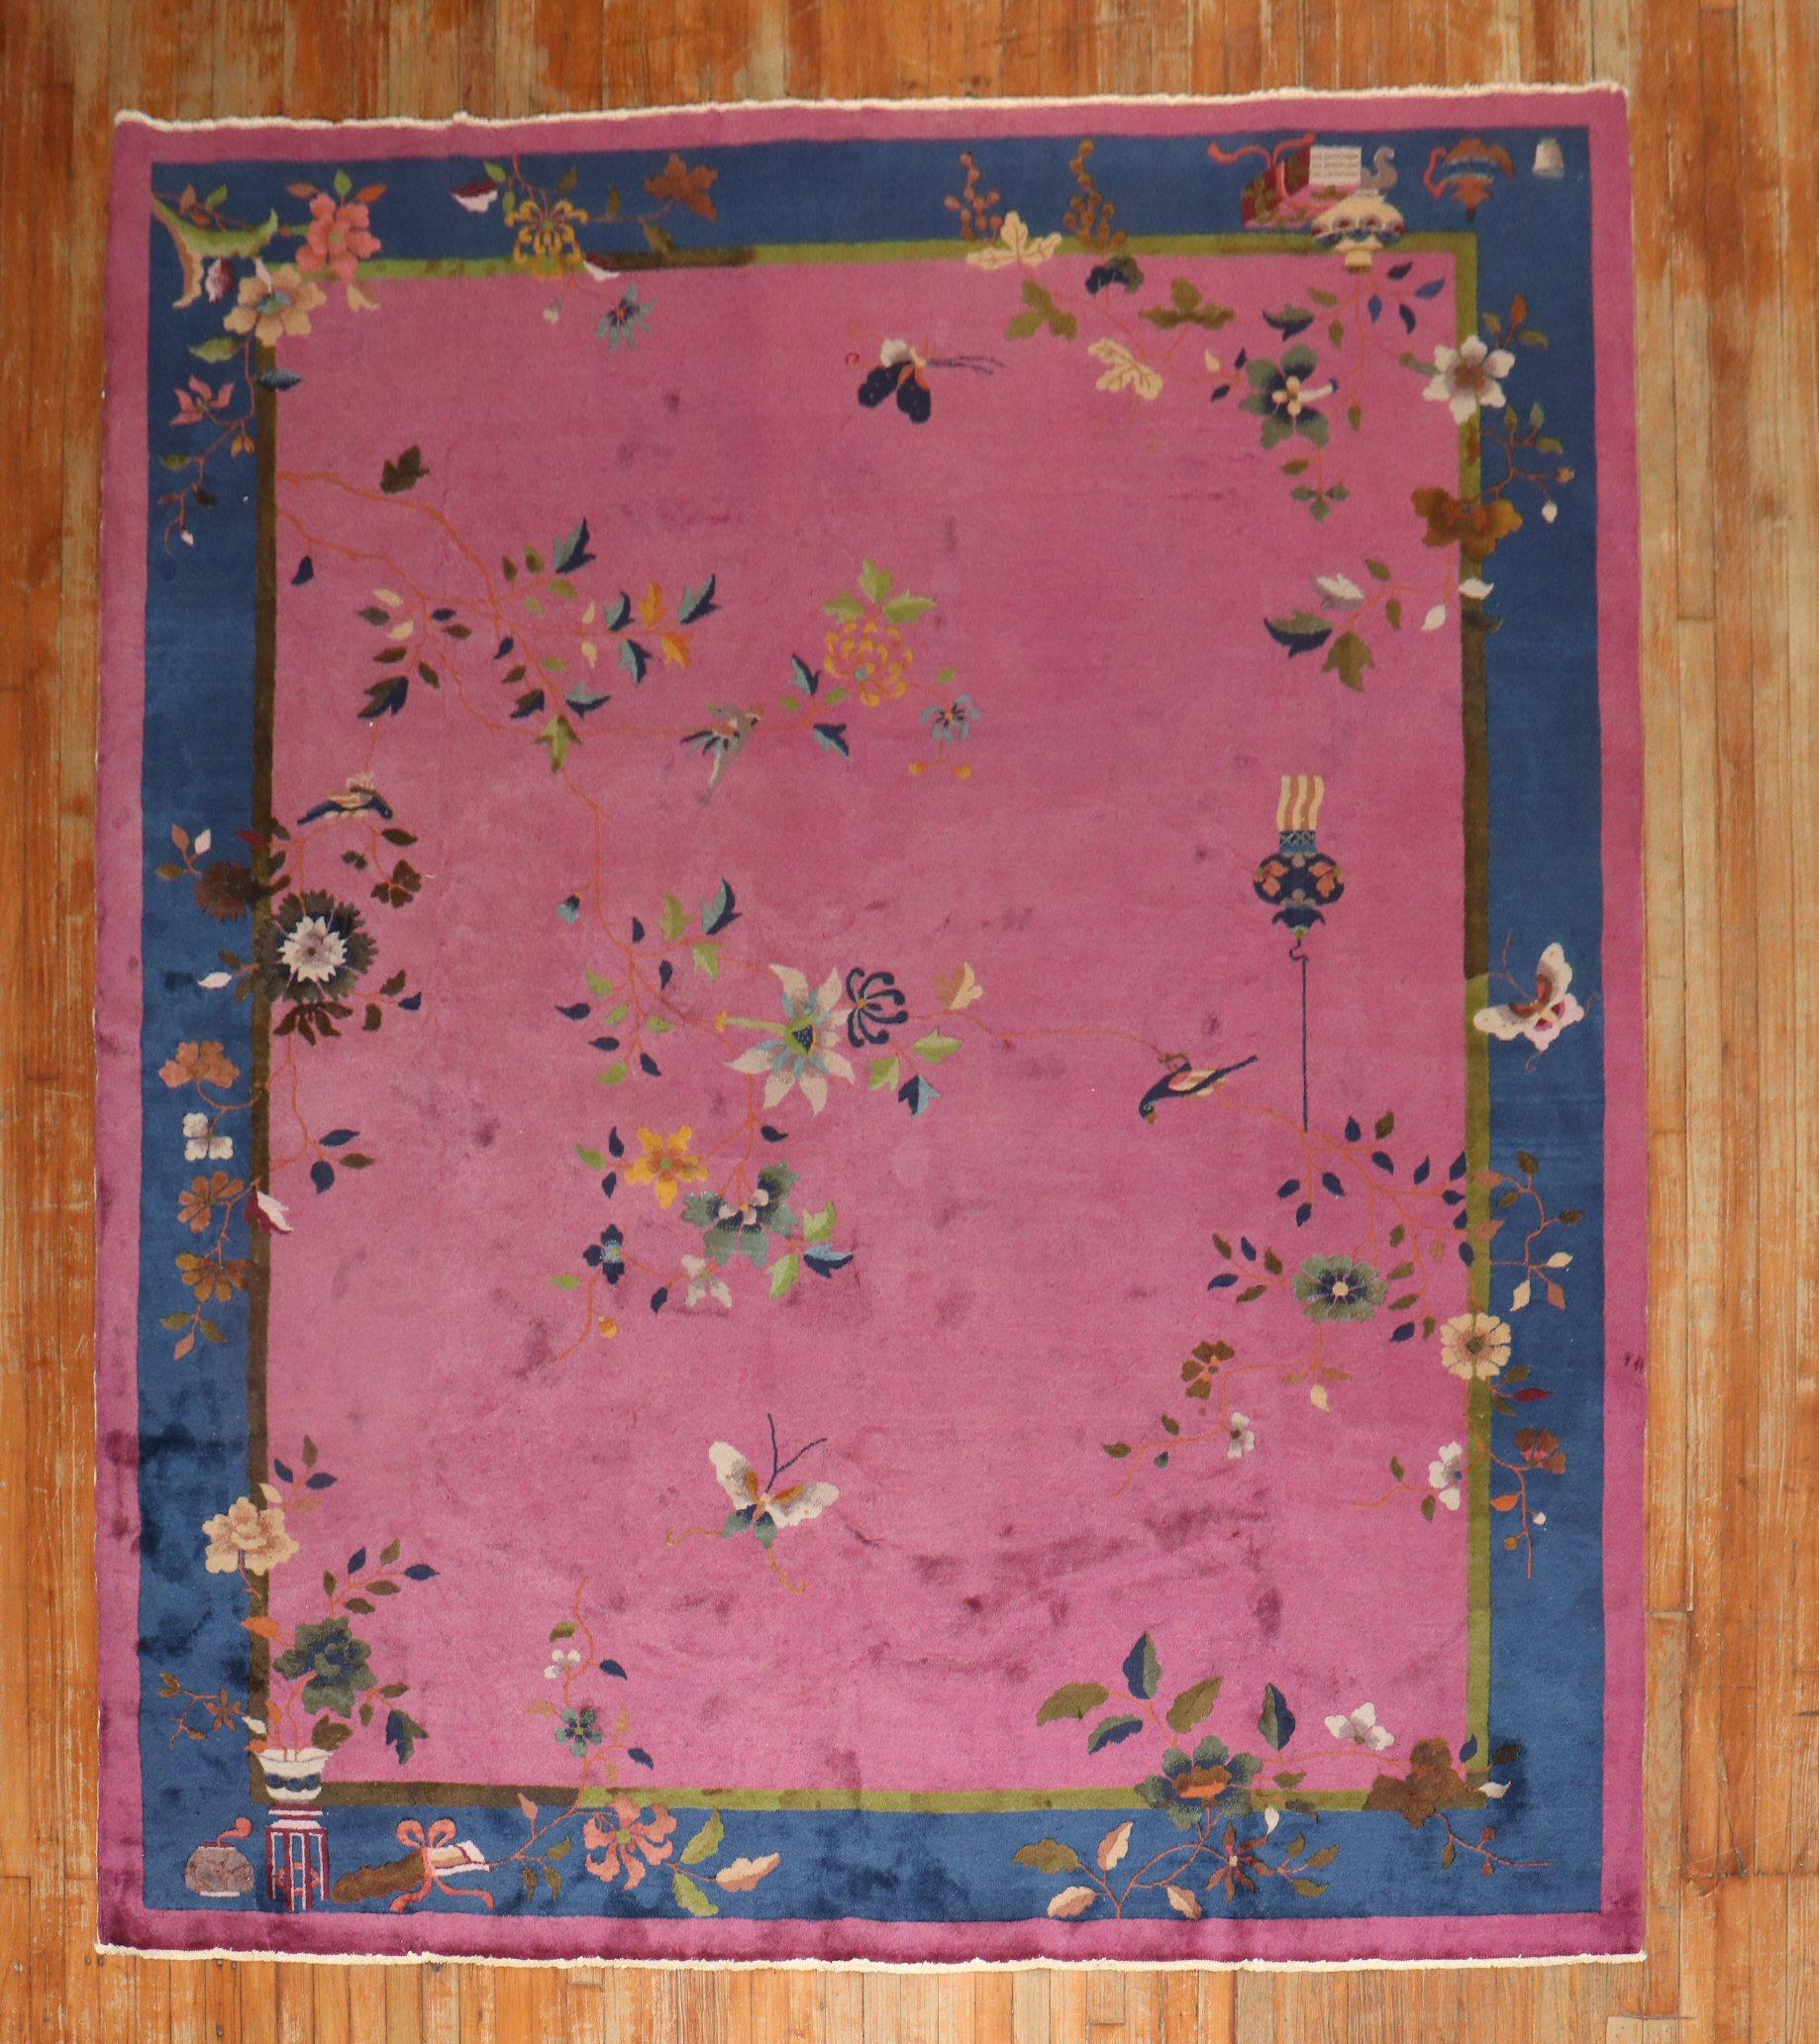 Enchanting early 20th century Chinese Art Deco carpet with a spacious floral design on a Magenta Ground.

Measures: 8' x 9'10''.